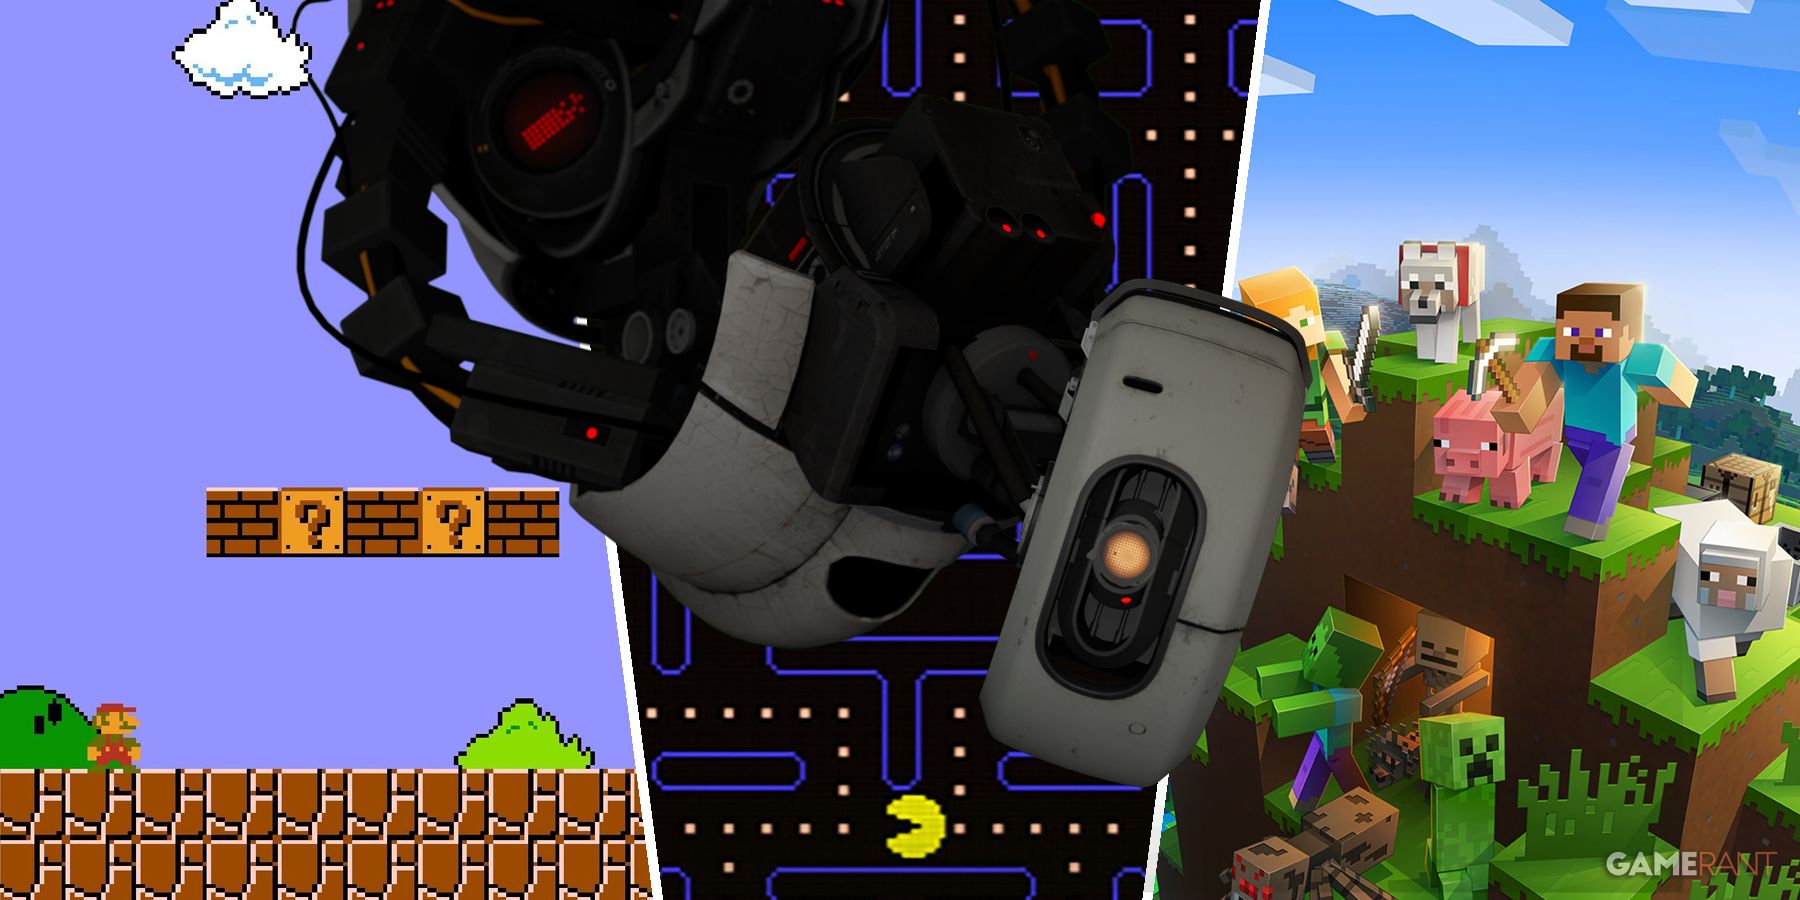 Super Mario Bros. Pac-Man, and Minecraftm with GLaDOS from Portal overtop